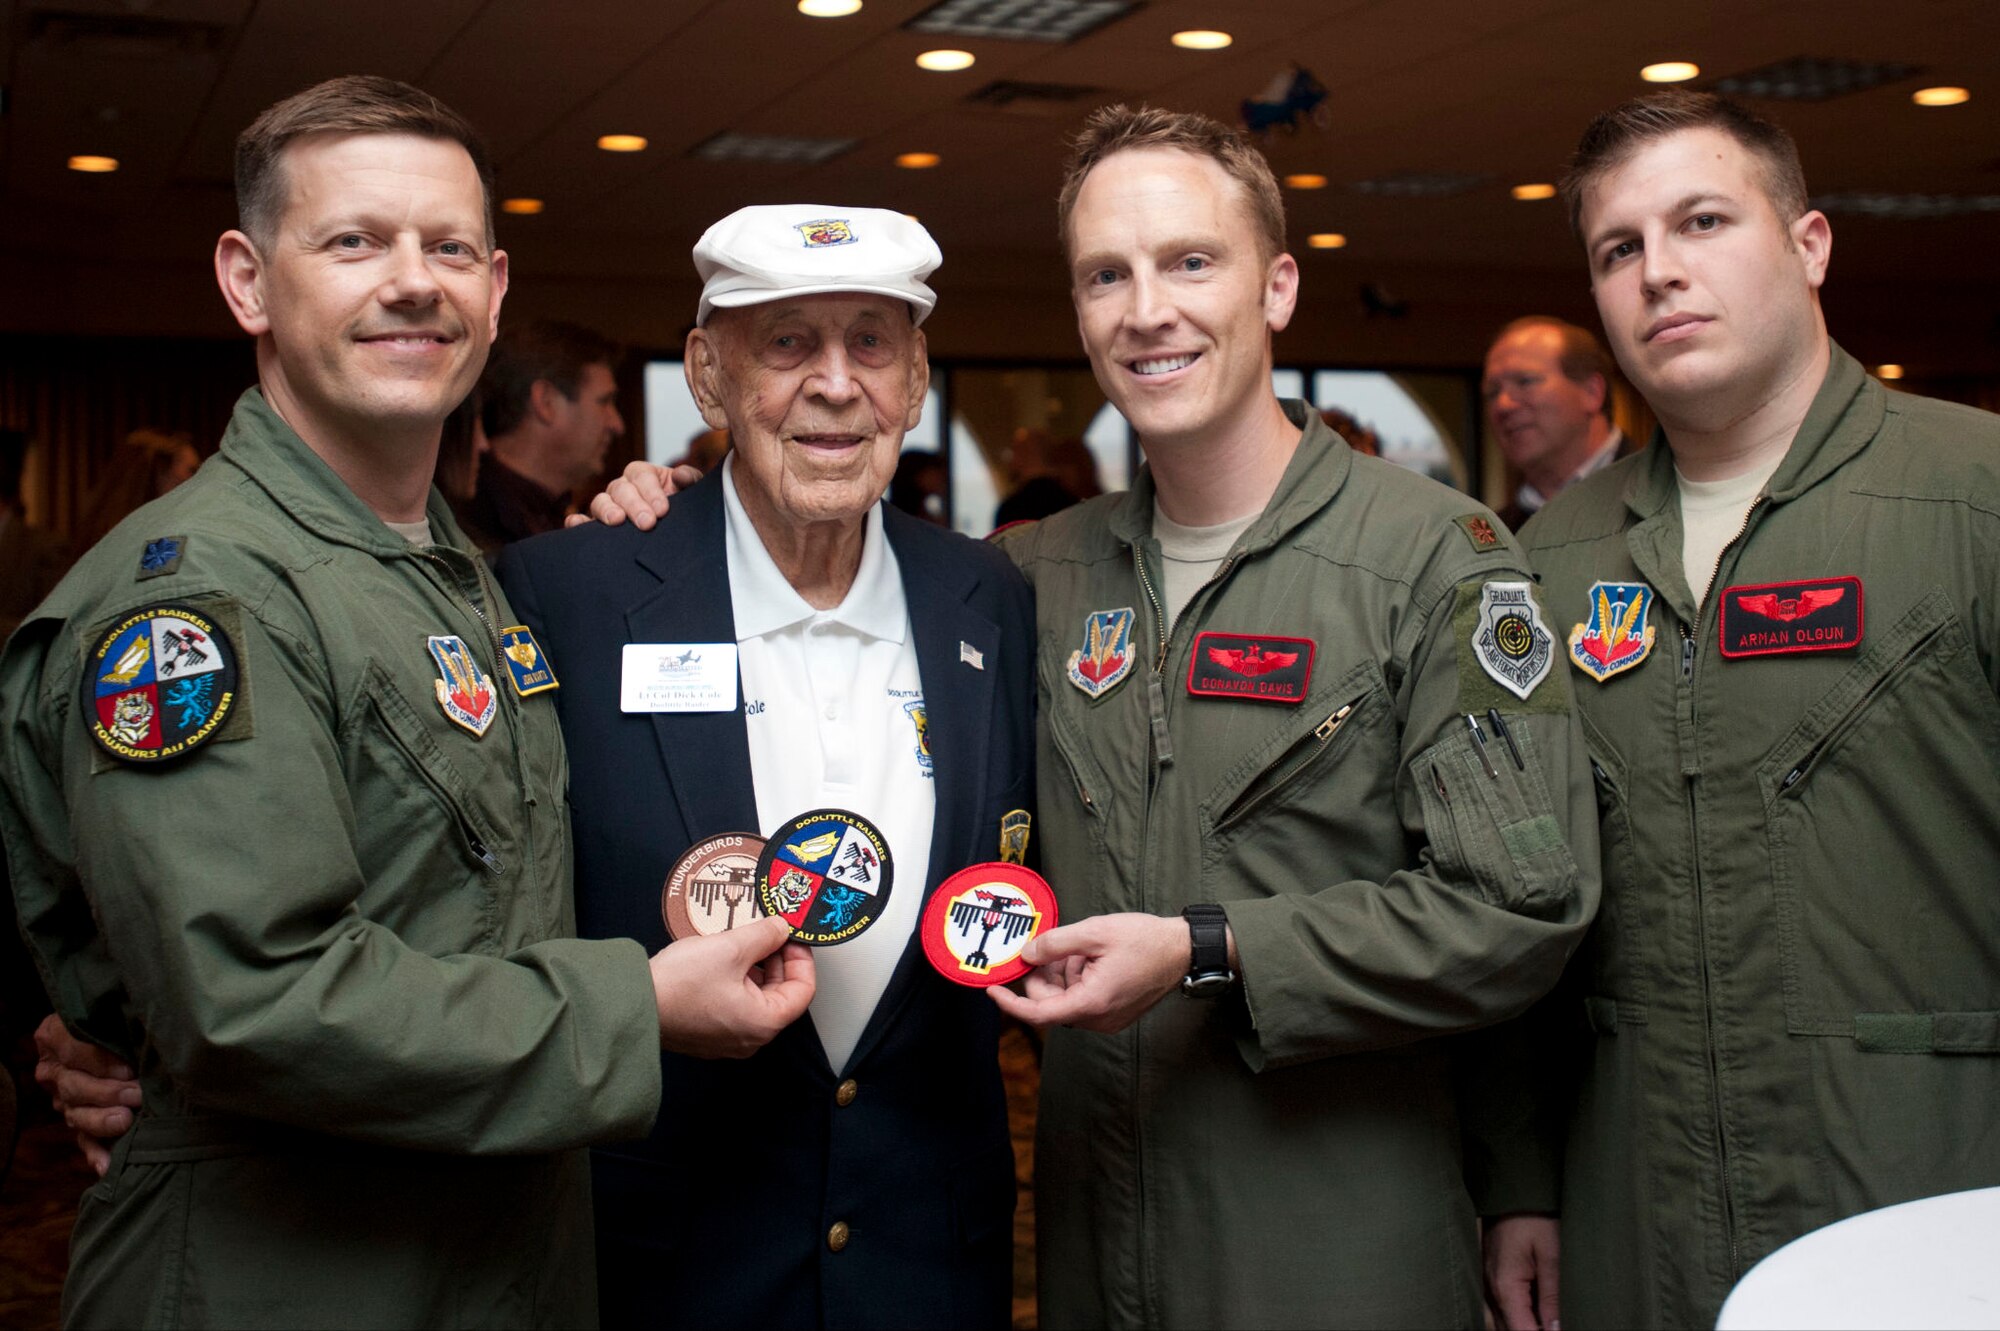 (Left to right) Lt. Col. John Martin, 28th Operations Group deputy commander, Lt. Col. Dick Cole, retired, Doolittle Raider co-pilot crew 1, Maj. Donavon Davis, 34th Bomb Squadron and 1st Lt. Arman Olgun, 34th Bomb Squadron, pose for a photo during a reception, April 19, 2013. Martin, Davis and Arman are from Ellsworth Air Force Base, SD and are part of the present Doolittle Raiders. (U.S. Air Force Photo by Senior Airman Carlin Leslie)
